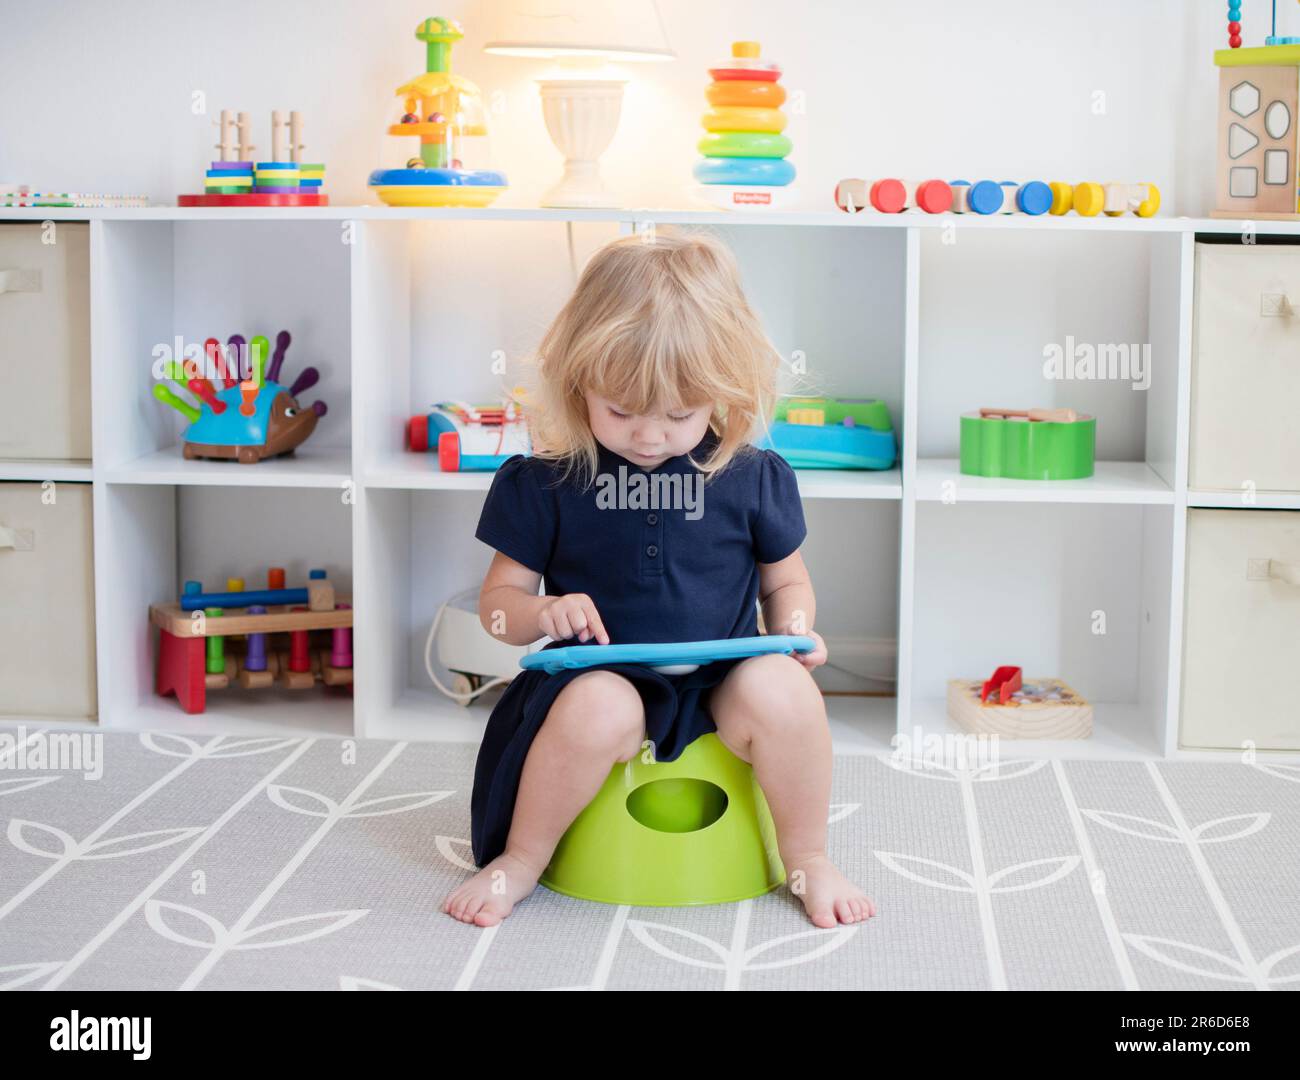 Toddler girl sitting on a potty with the tablet. Potty training. Toilet training Stock Photo